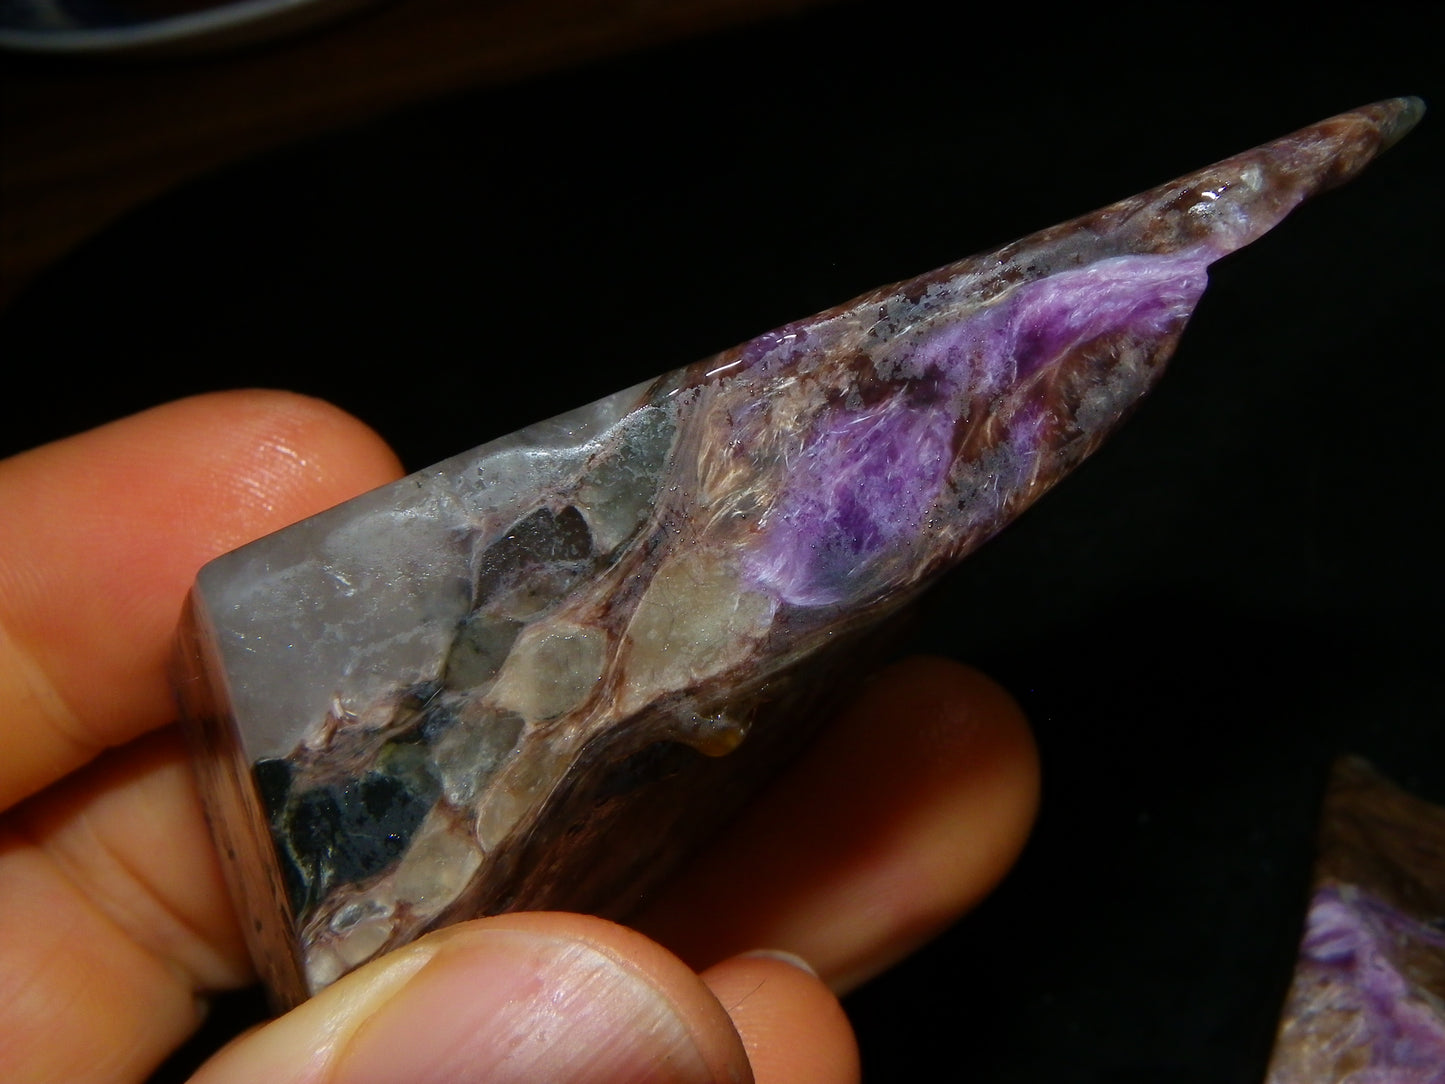 2 Nice Large Rough/Sliced/Coated Charoite Specimens 1044cts Purple/Silver Host Rock :)